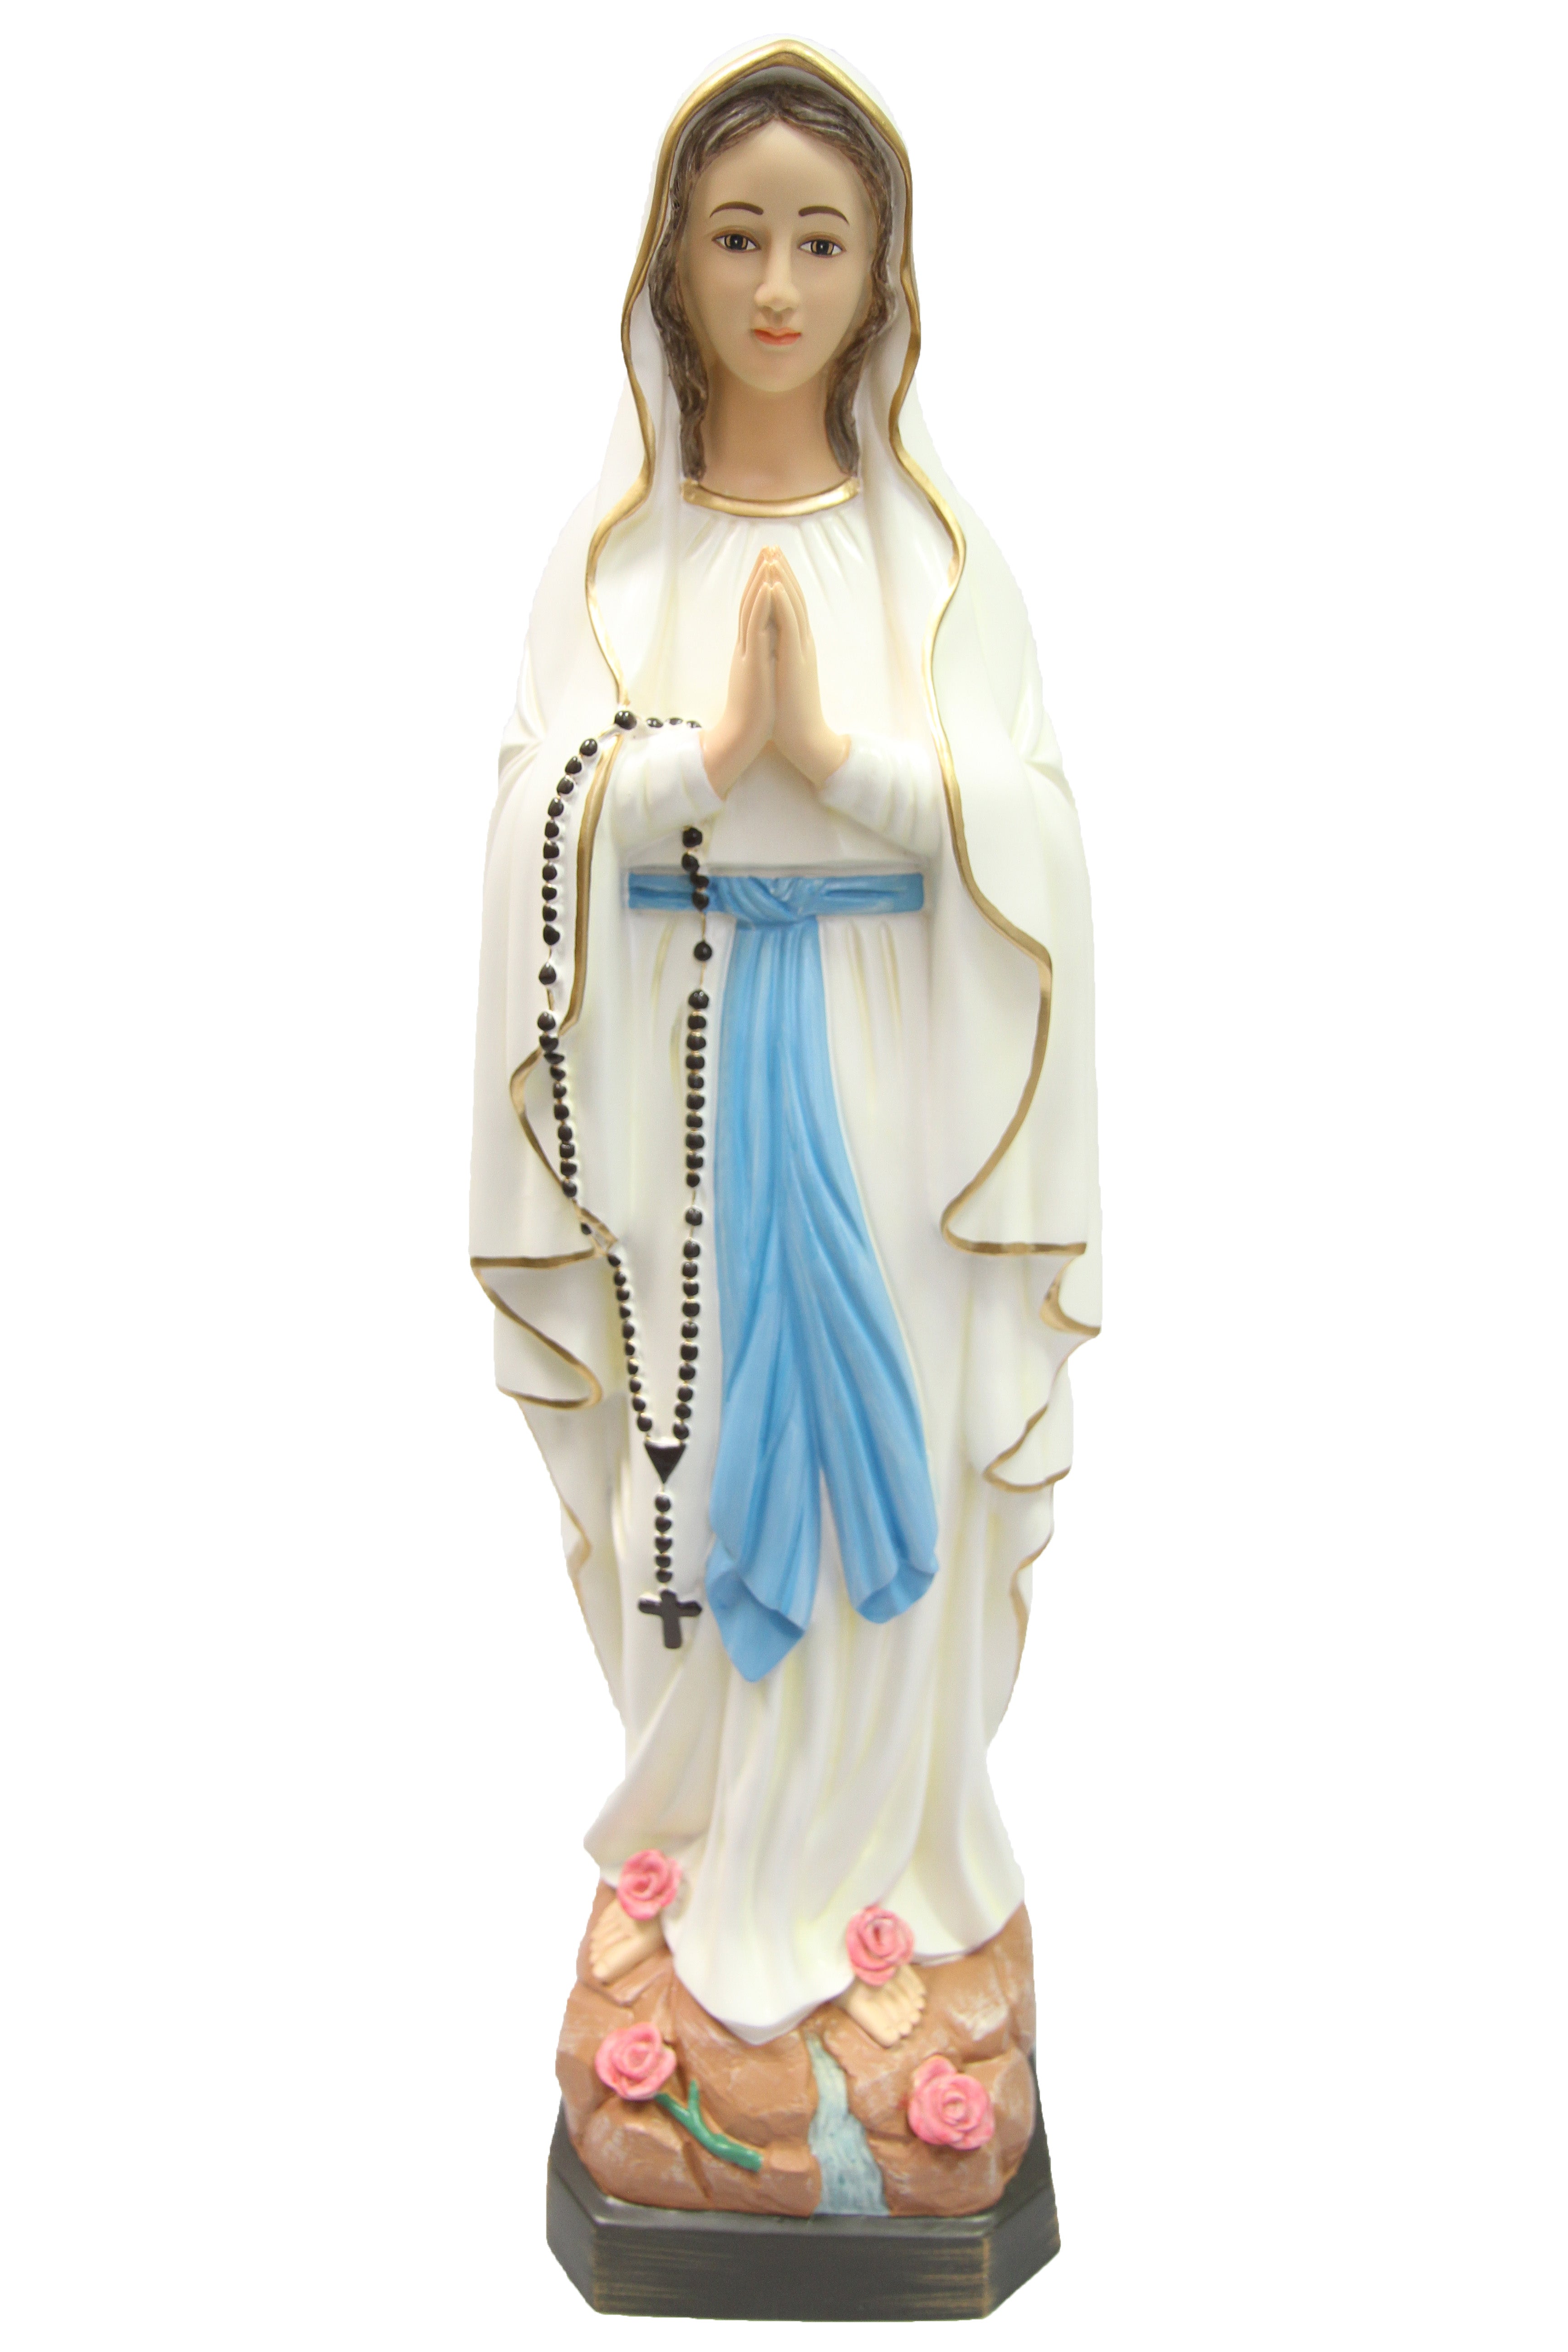 27 Inch Our Lady of Lourdes Virgin Mary Catholic Statue Vittoria Collection Made in Italy